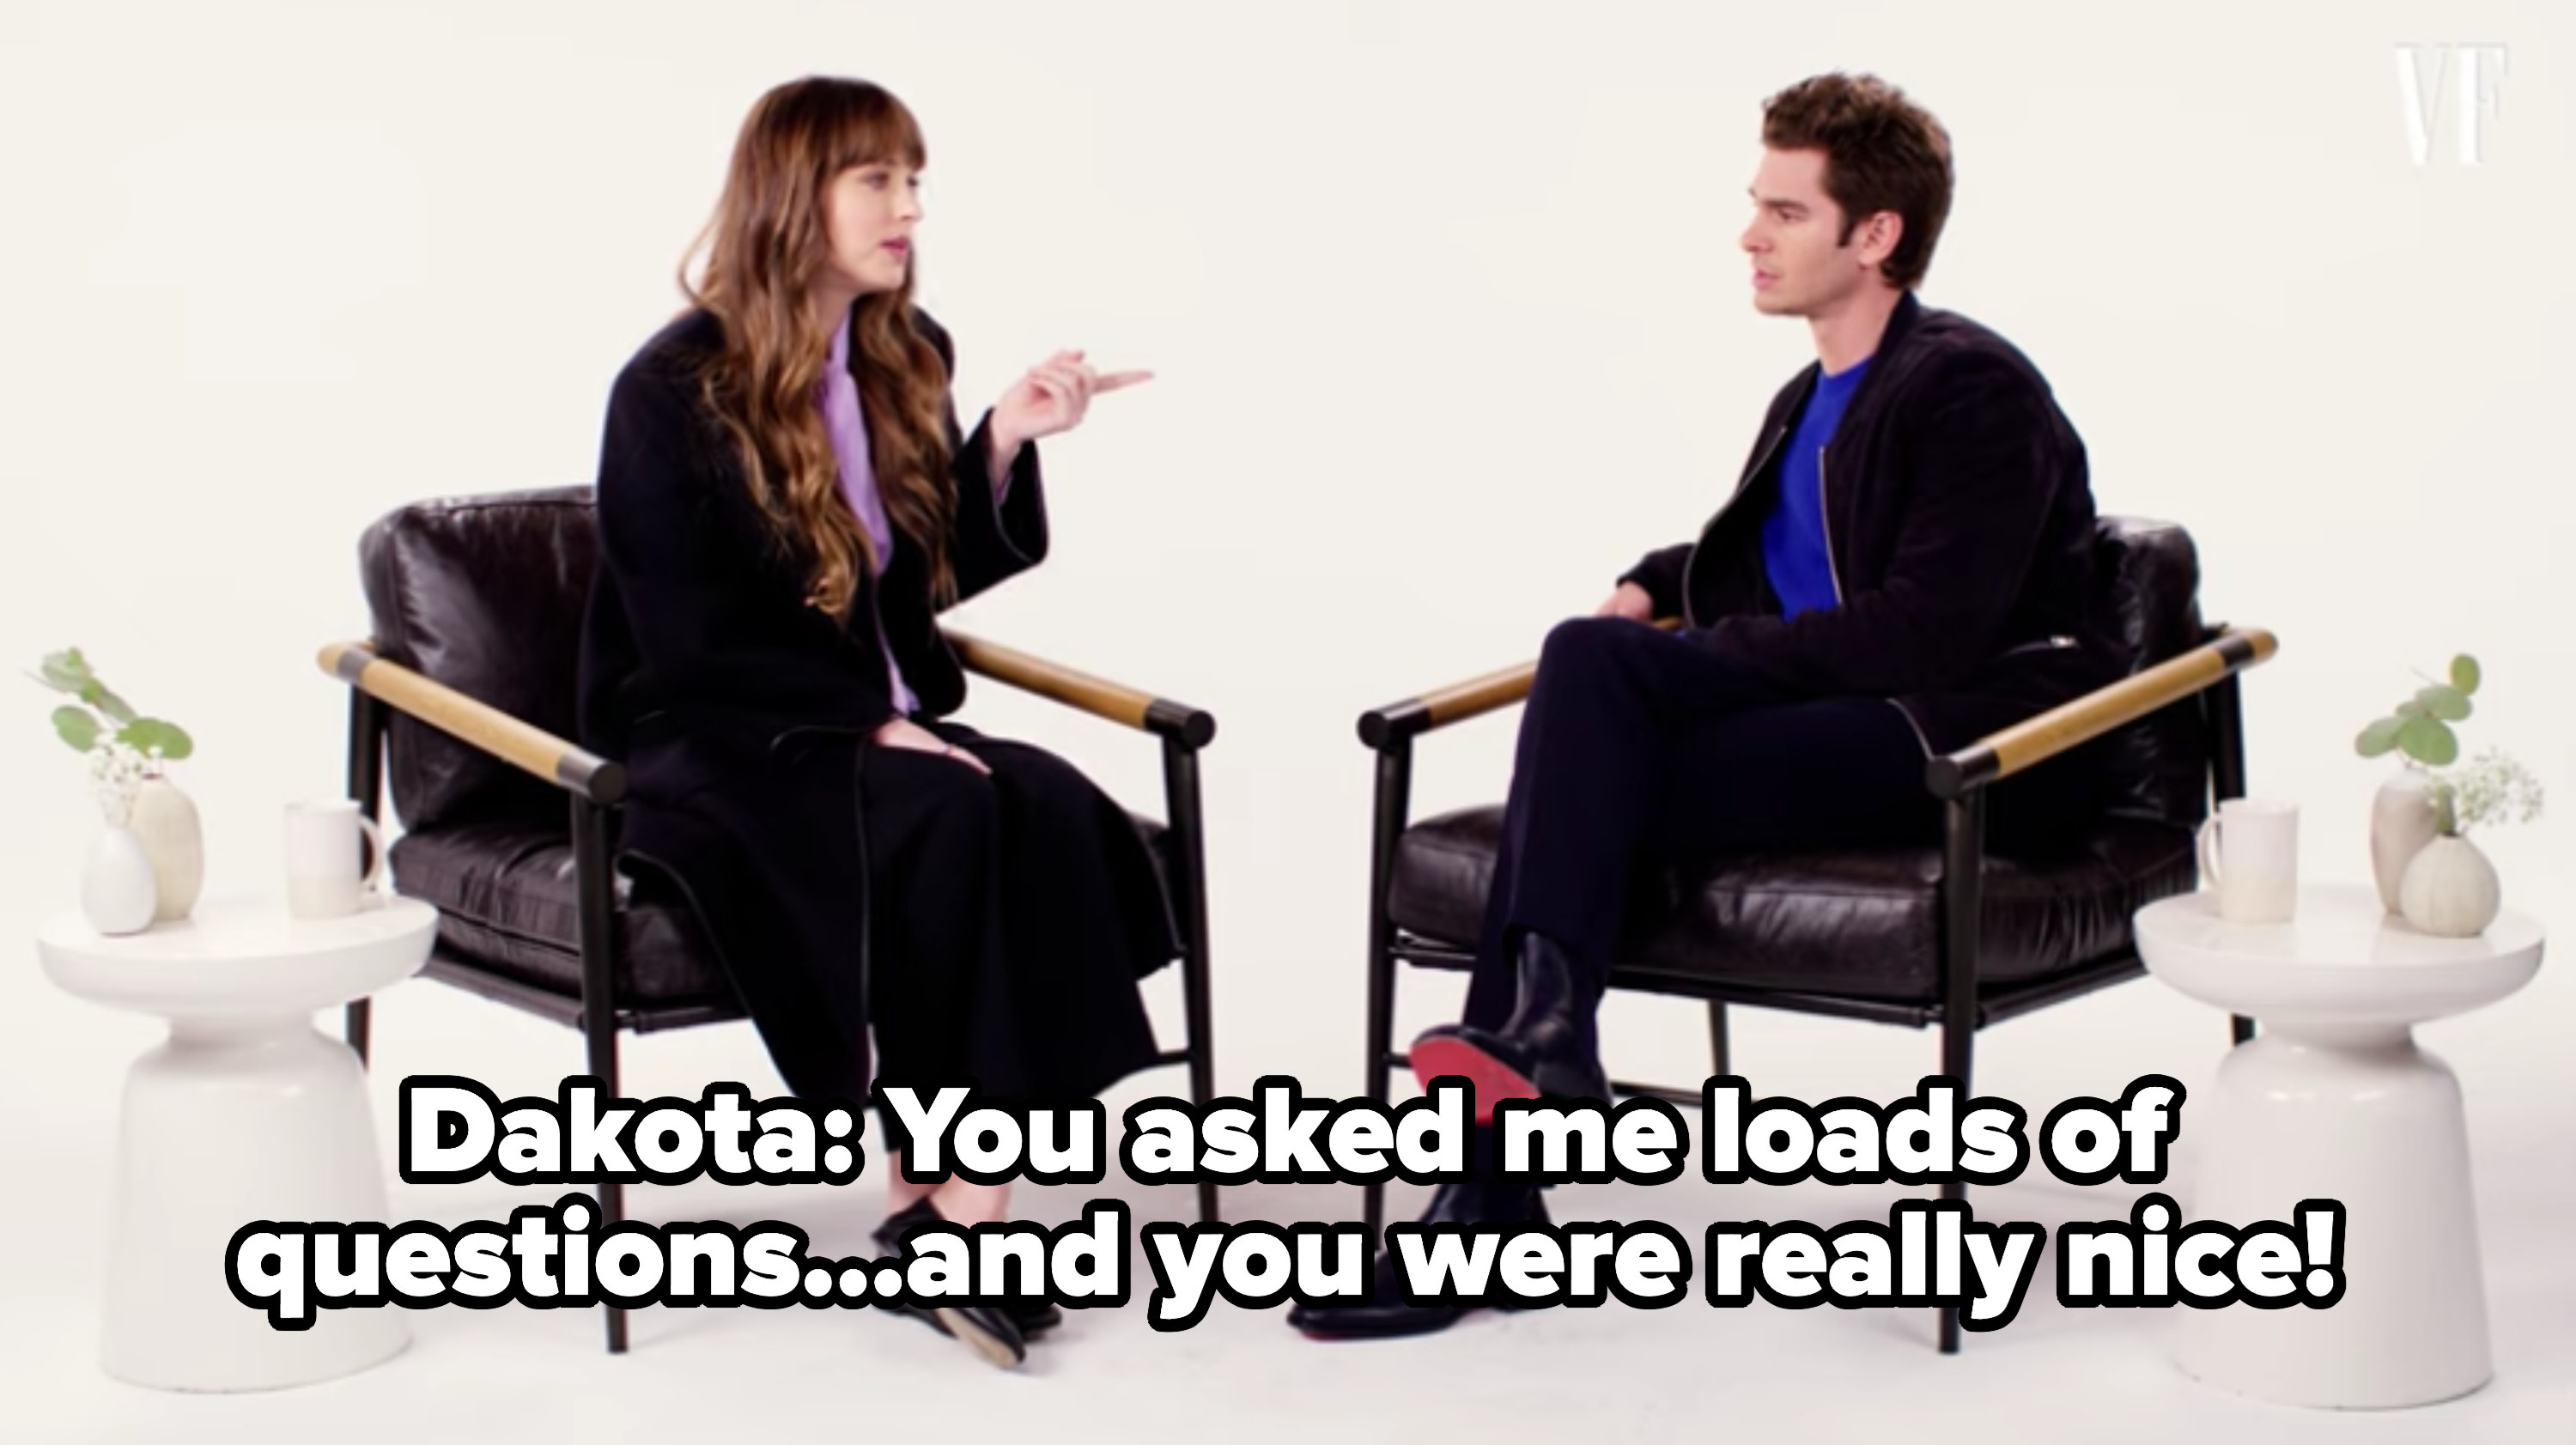 Dakota saying to Andrew, &quot;You asked me loads of questions...and you were really nice!&quot;